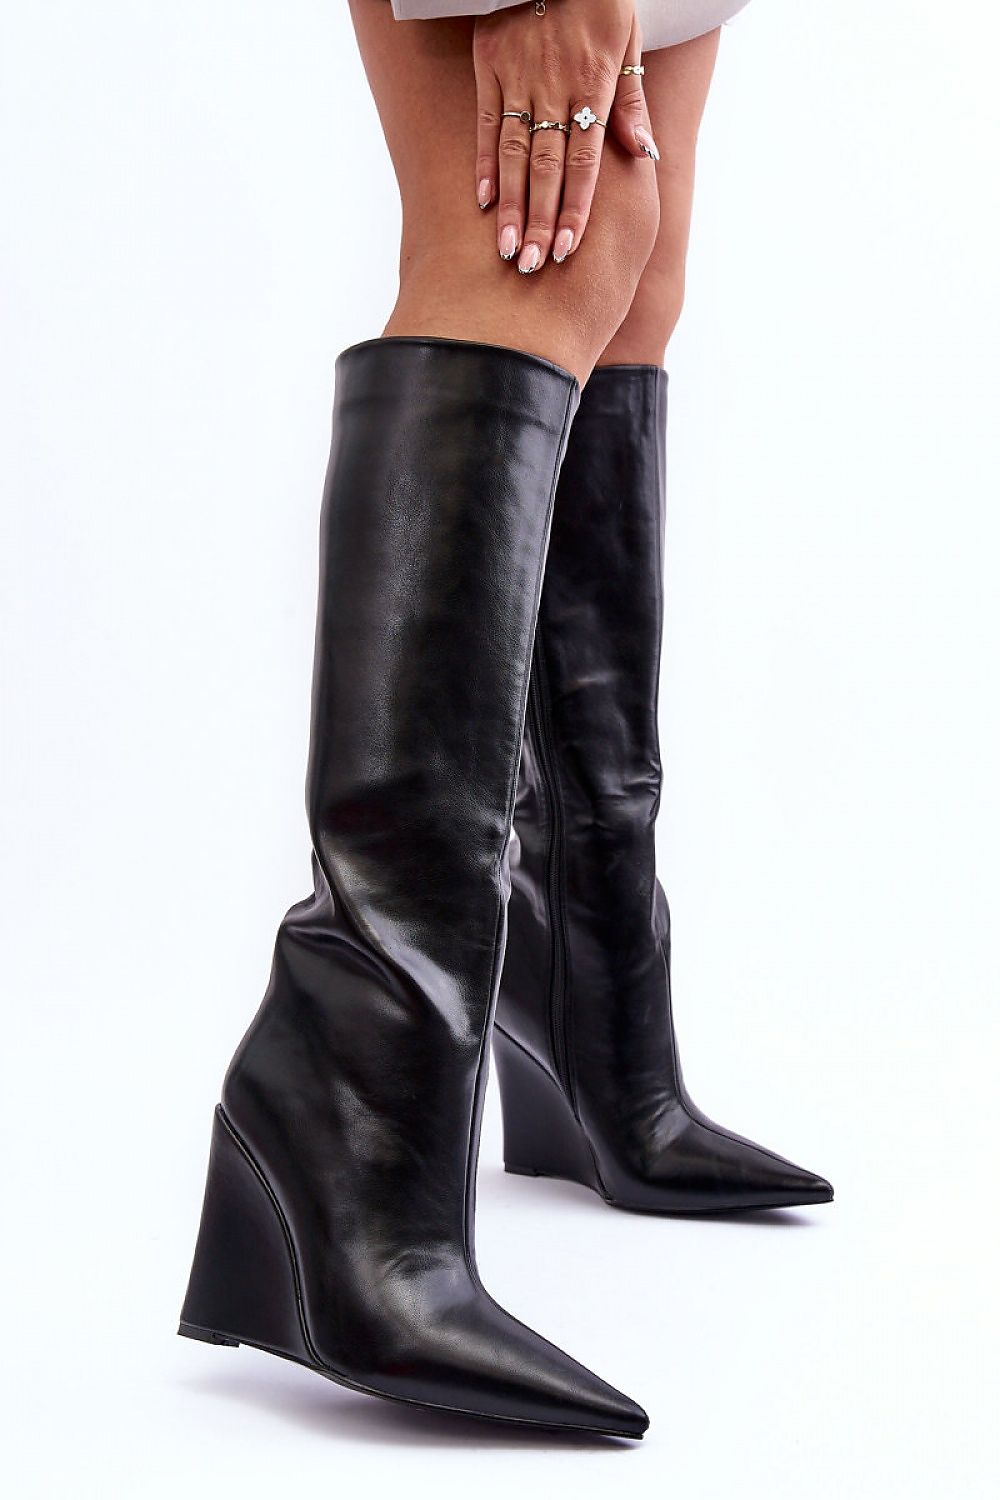 Wedge Knee High Boots - Modern Intrigue | Strictly In